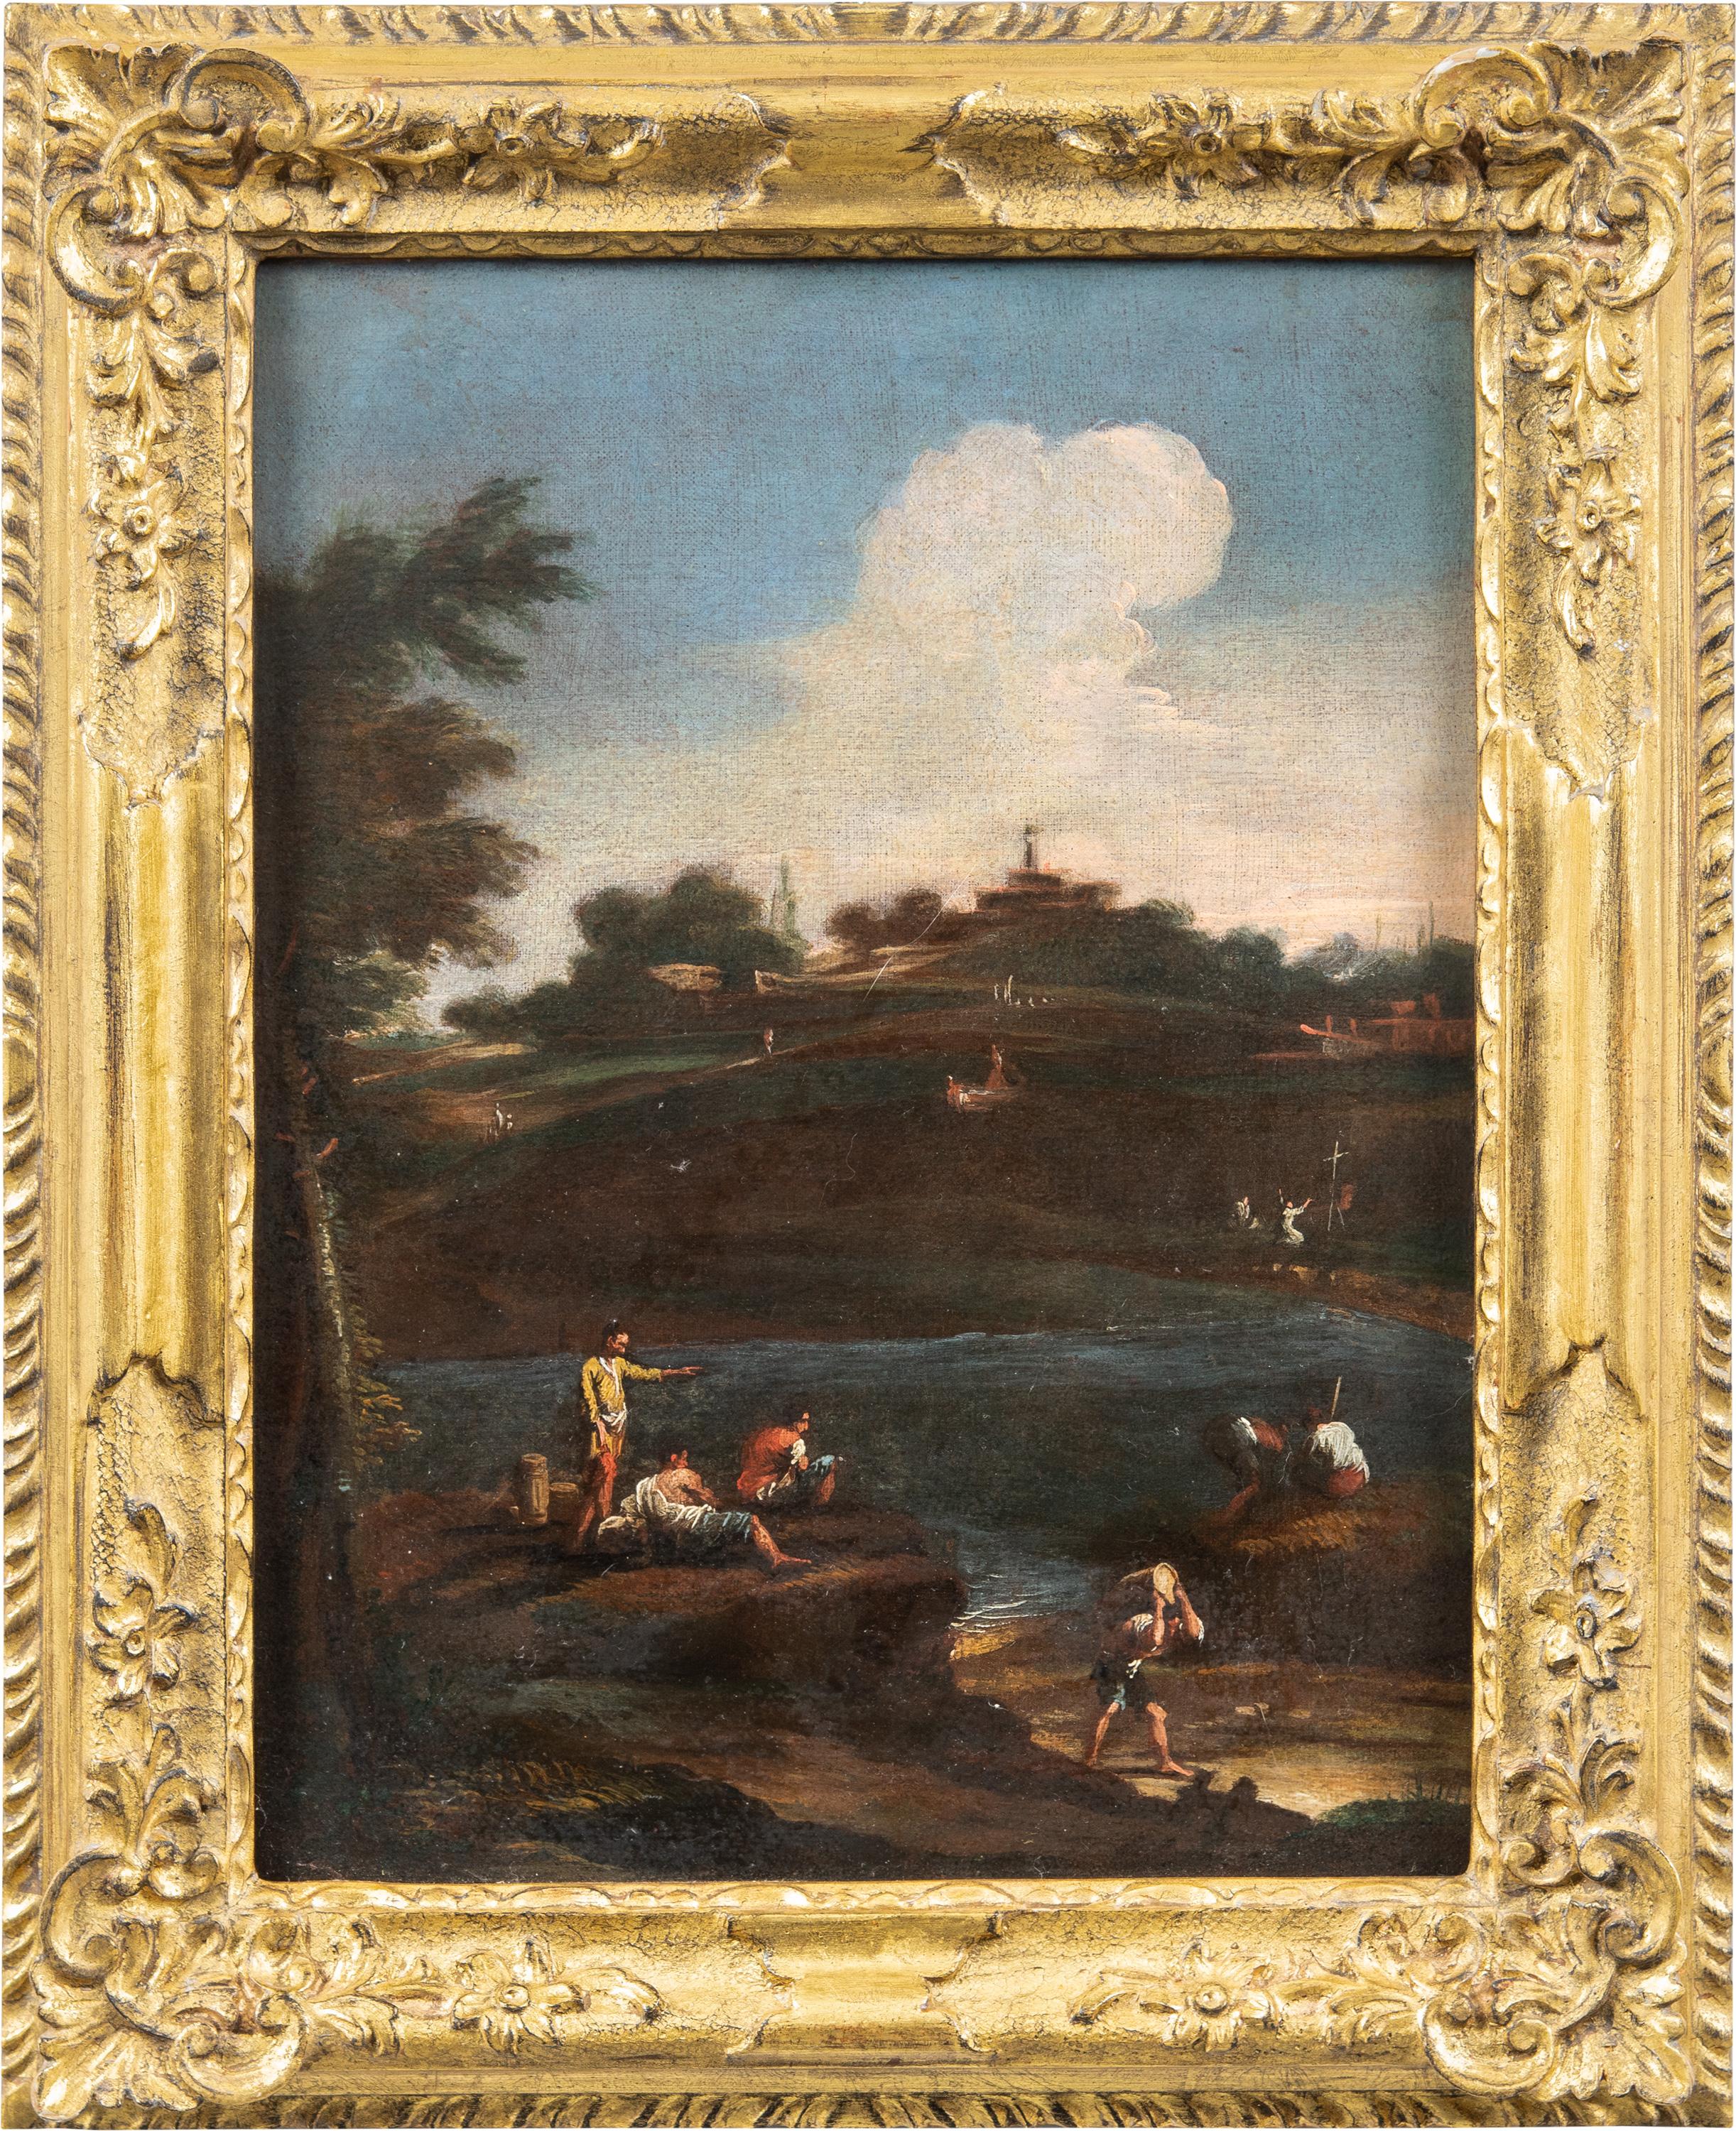 Unknown Landscape Painting - Venetian follower of Marco Ricci - 18th century landscape painting figures